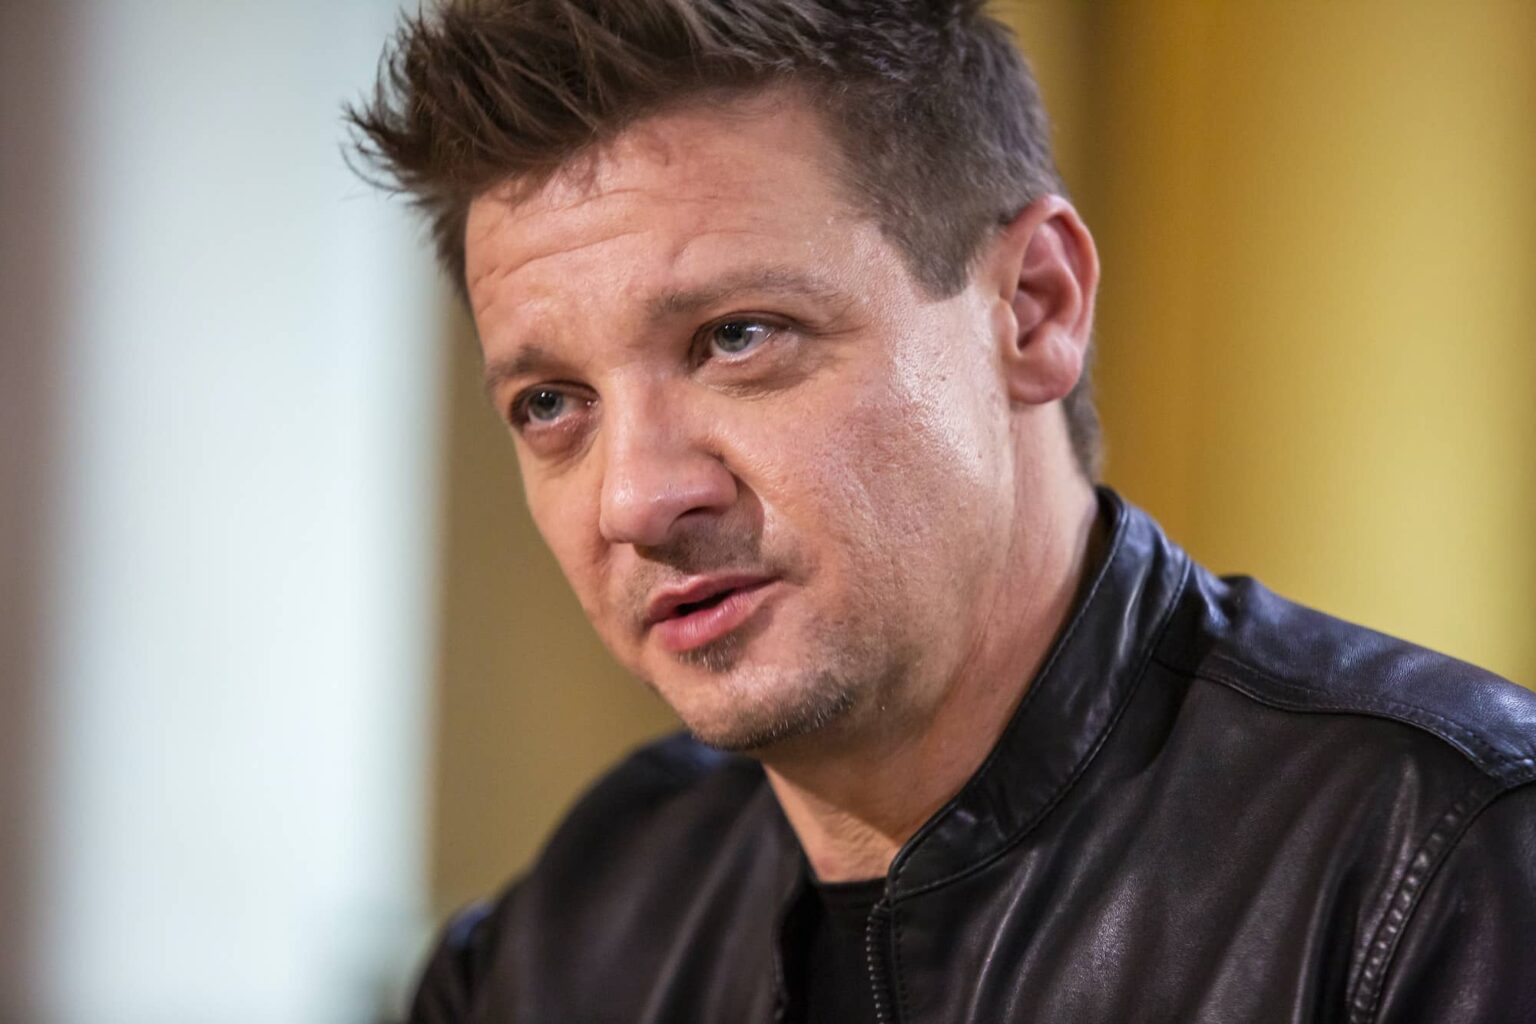 Hawkeye fans, brace yourselves for this one. Check out the disturbing allegations against Jeremy Renner – coming from his ex-wife, no less!